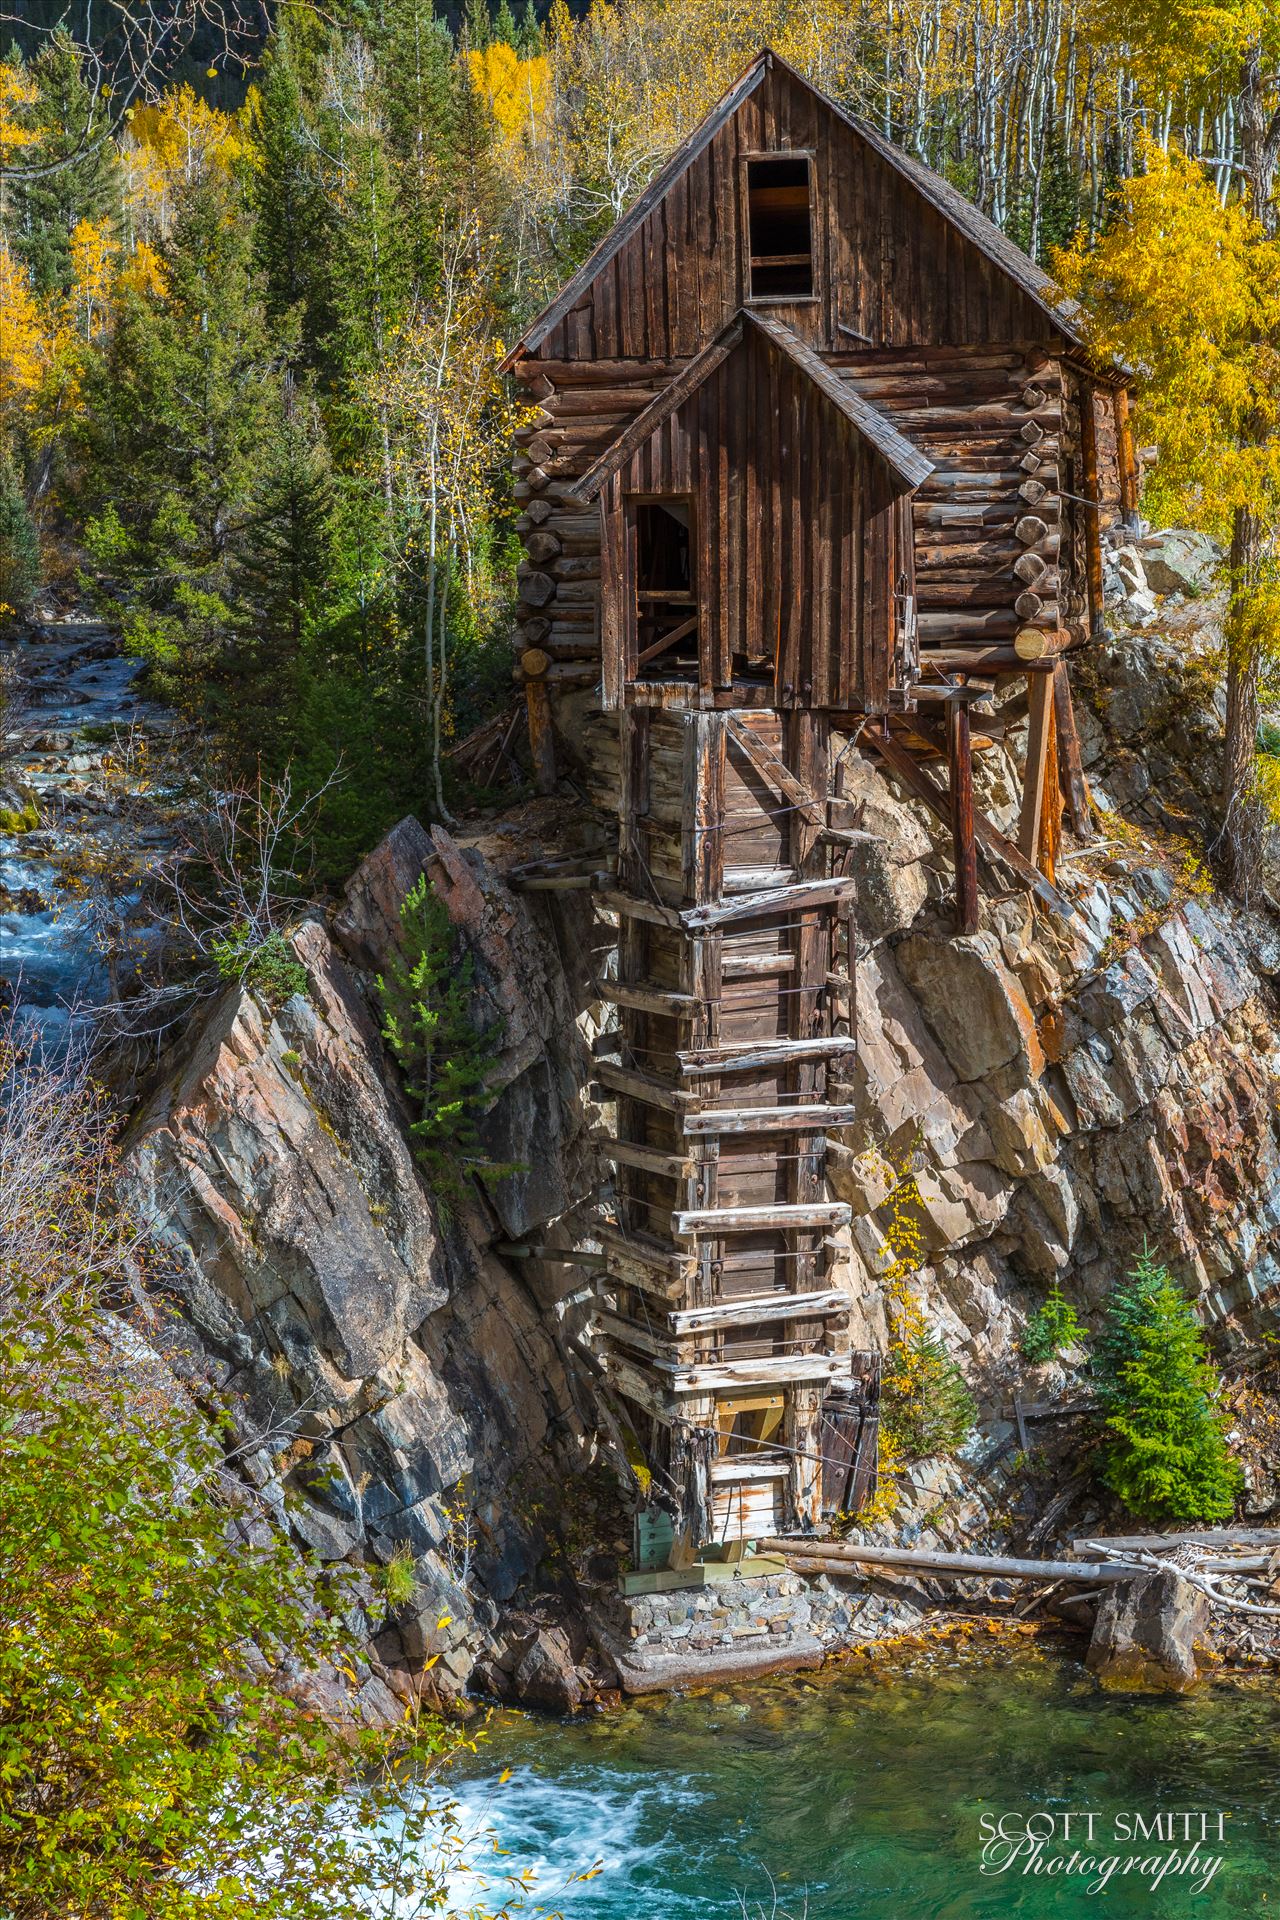 Crystal Mill, Colorado 10 The Crystal Mill, or the Old Mill is an 1892 wooden powerhouse located on an outcrop above the Crystal River in Crystal, Colorado by Scott Smith Photos